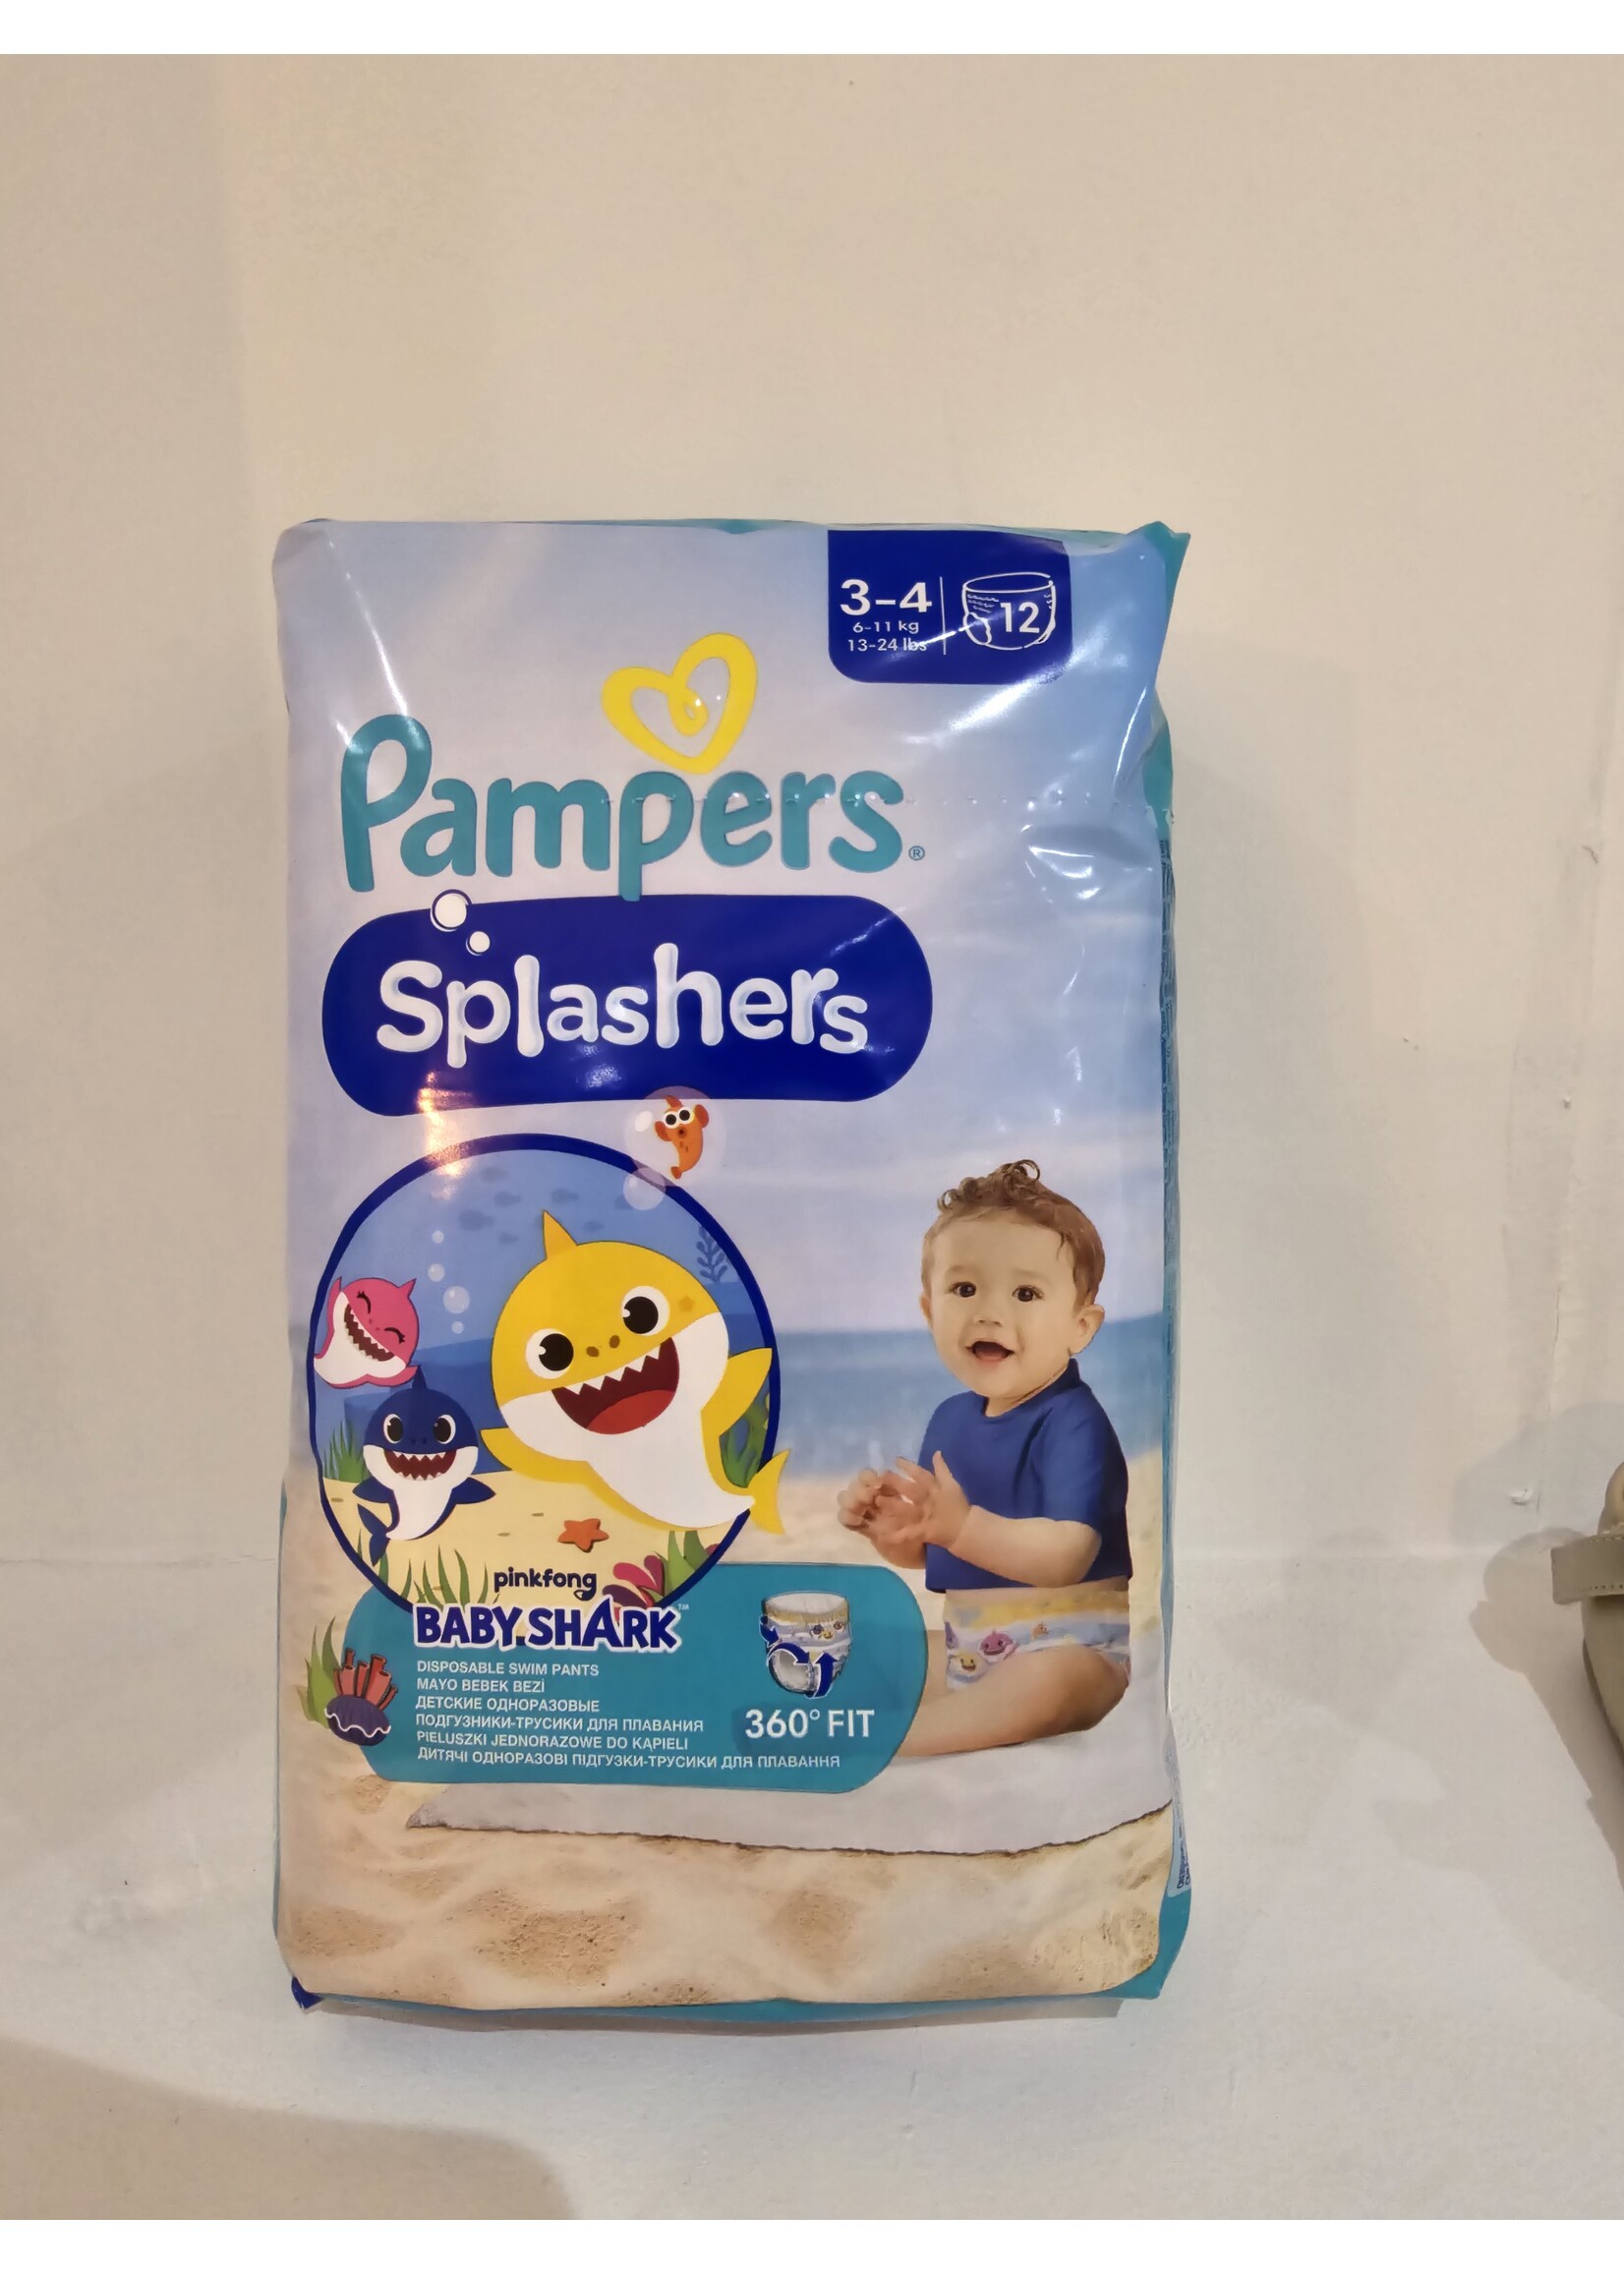 Pampers Pampers Splashers